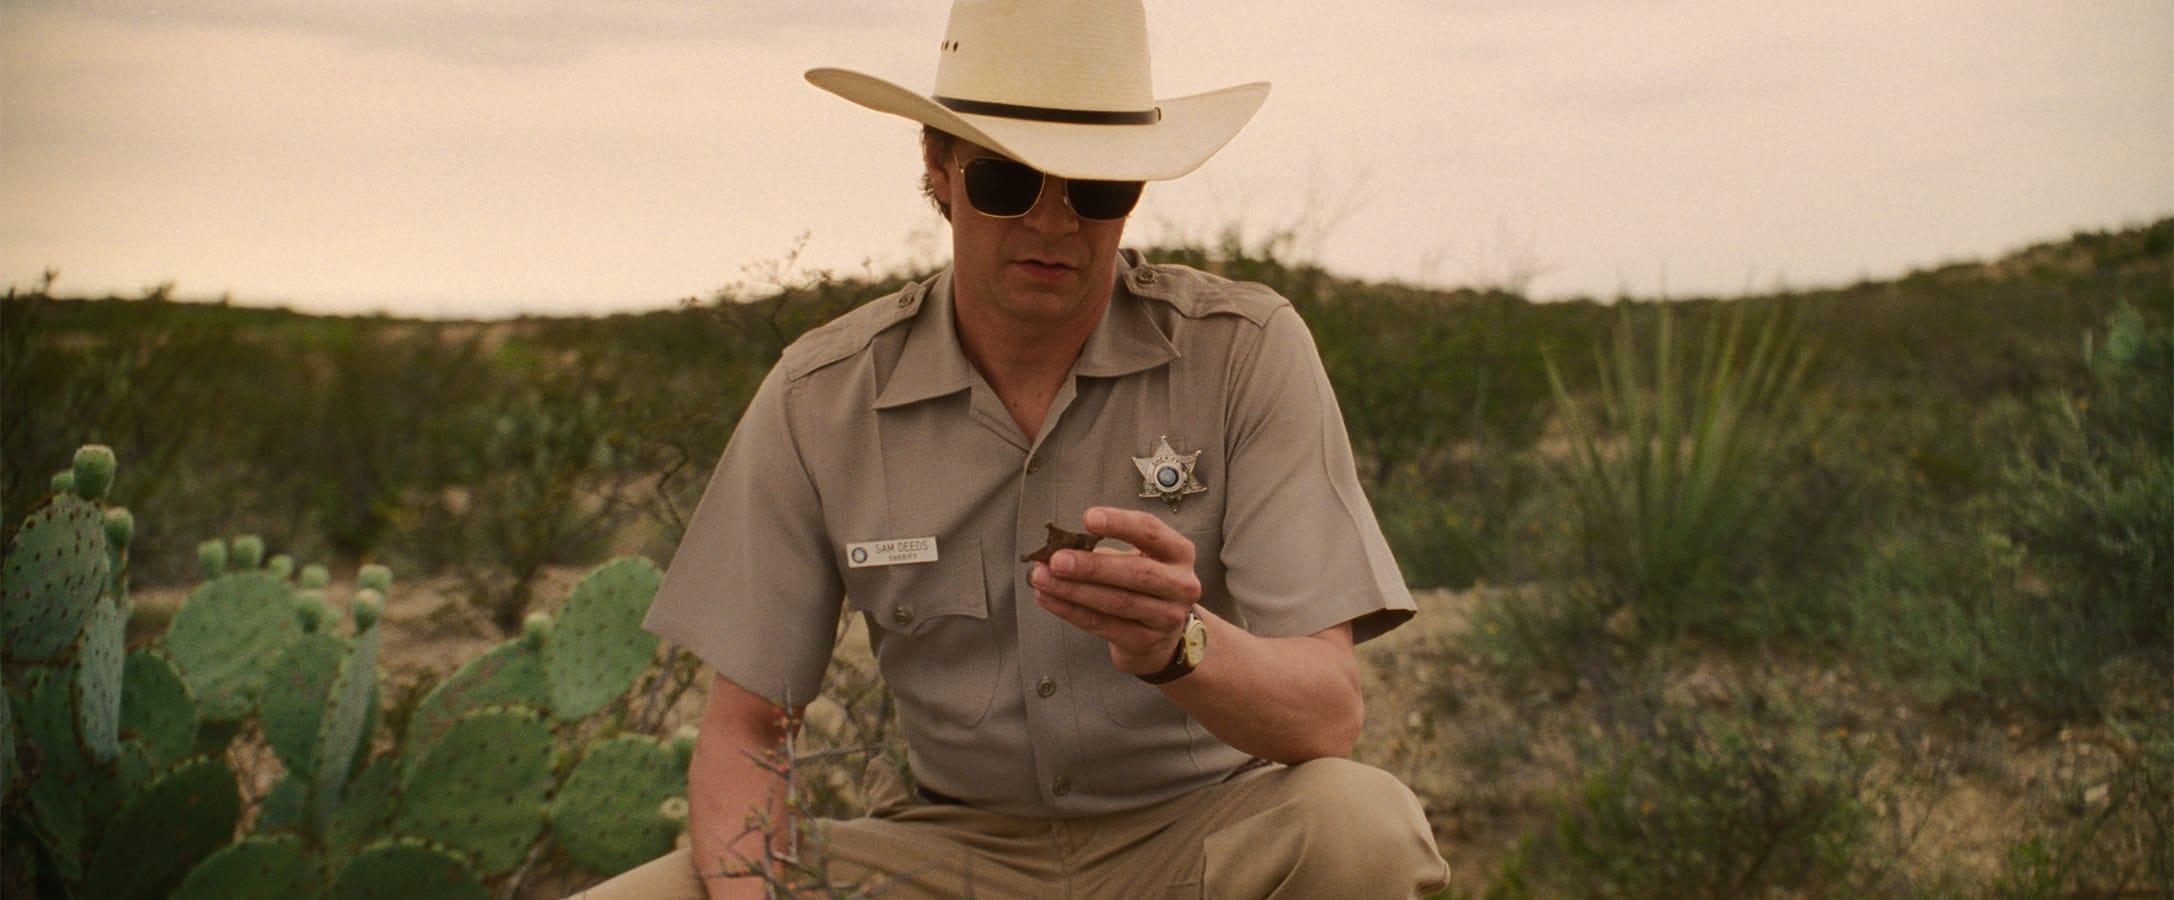 A person in western sheriff gear holding and looking at a star-shaped badge